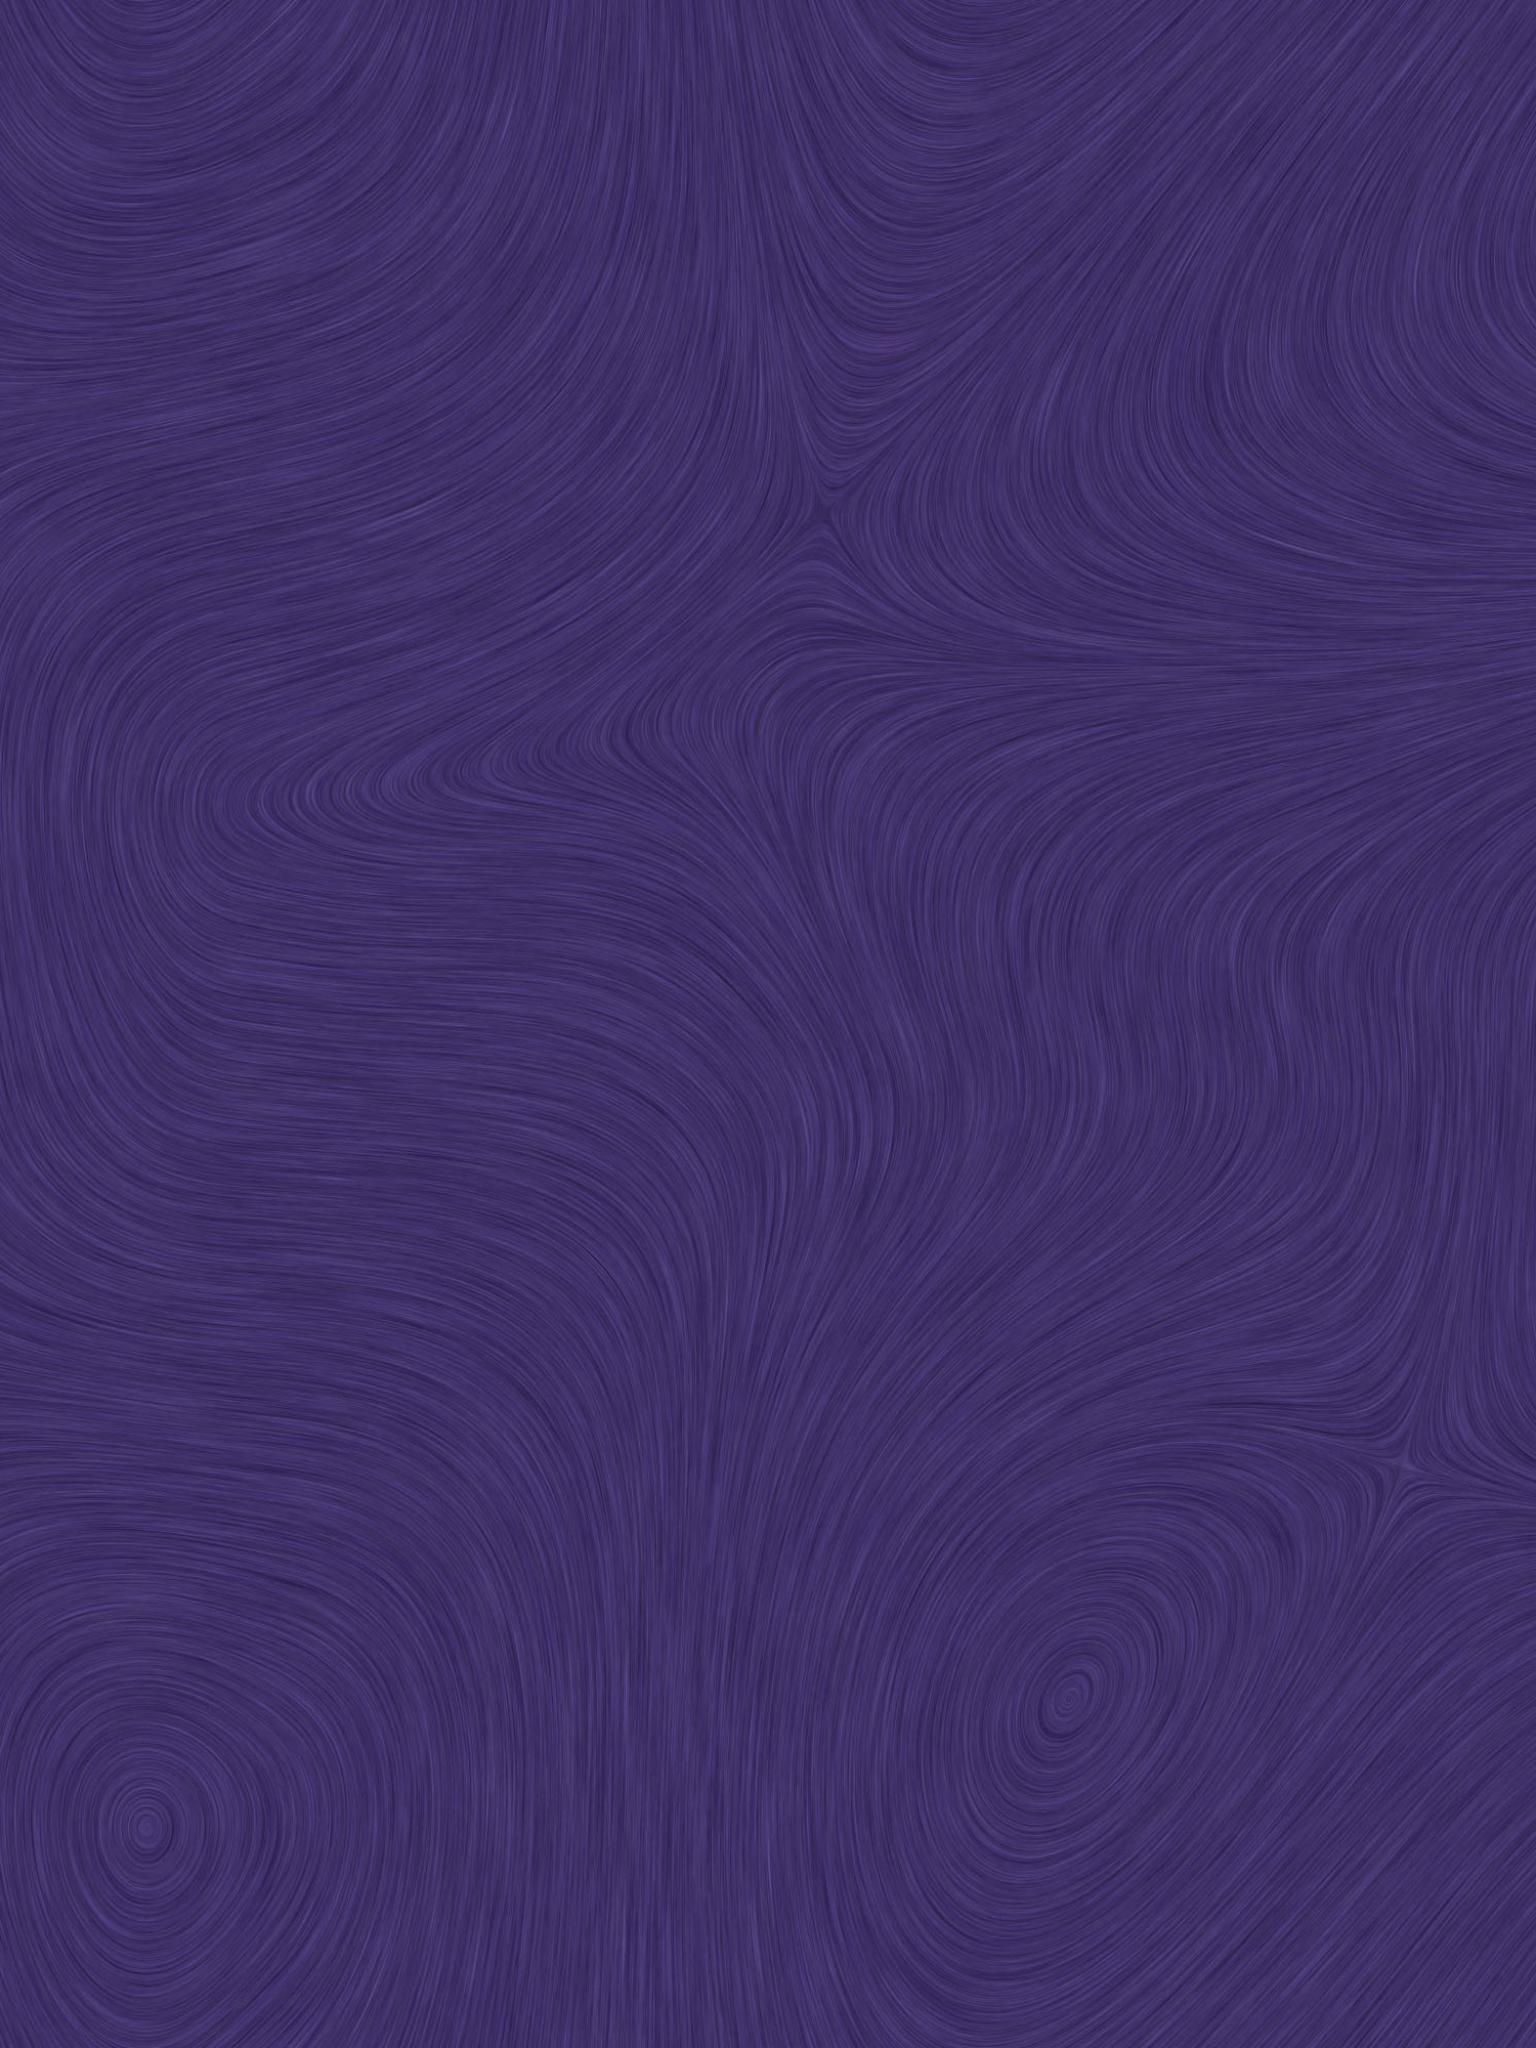 1536x48 Purple Texture 1536x48 Resolution Wallpaper Hd Abstract 4k Wallpapers Images Photos And Background